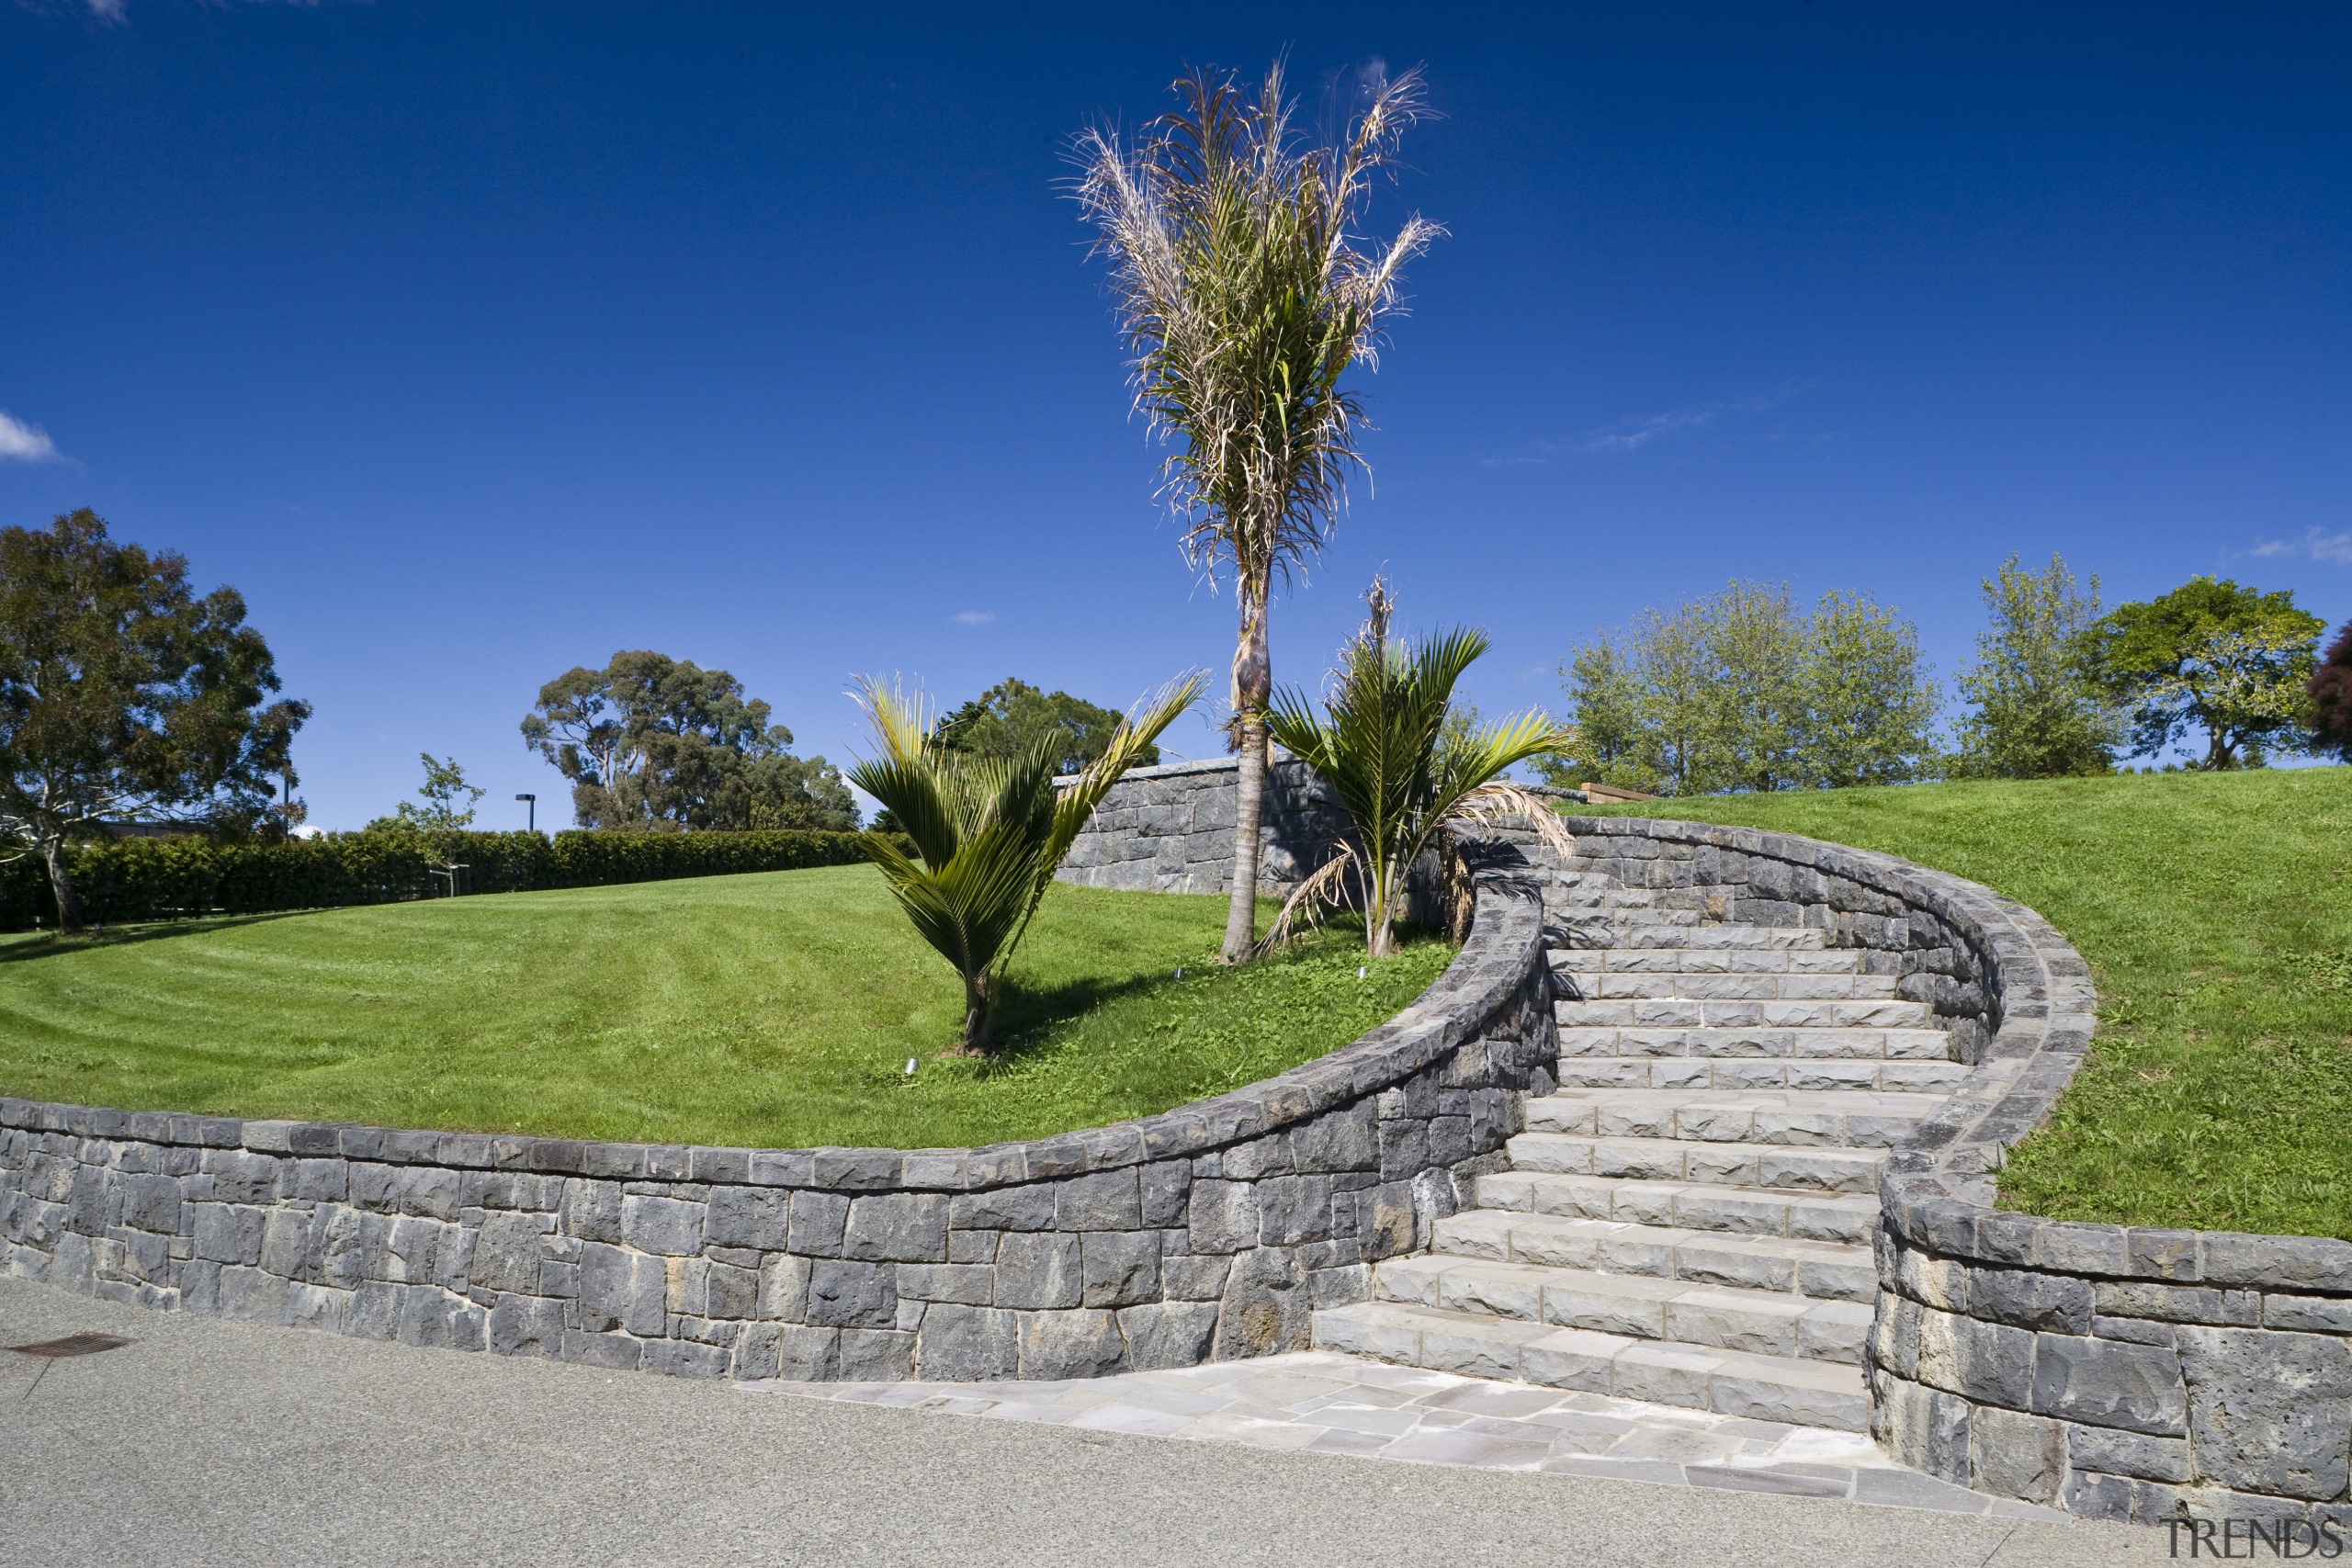 Image of stone walls which have been built estate, garden, grass, landscape, landscaping, lawn, path, sky, stone wall, tree, walkway, wall, gray, blue